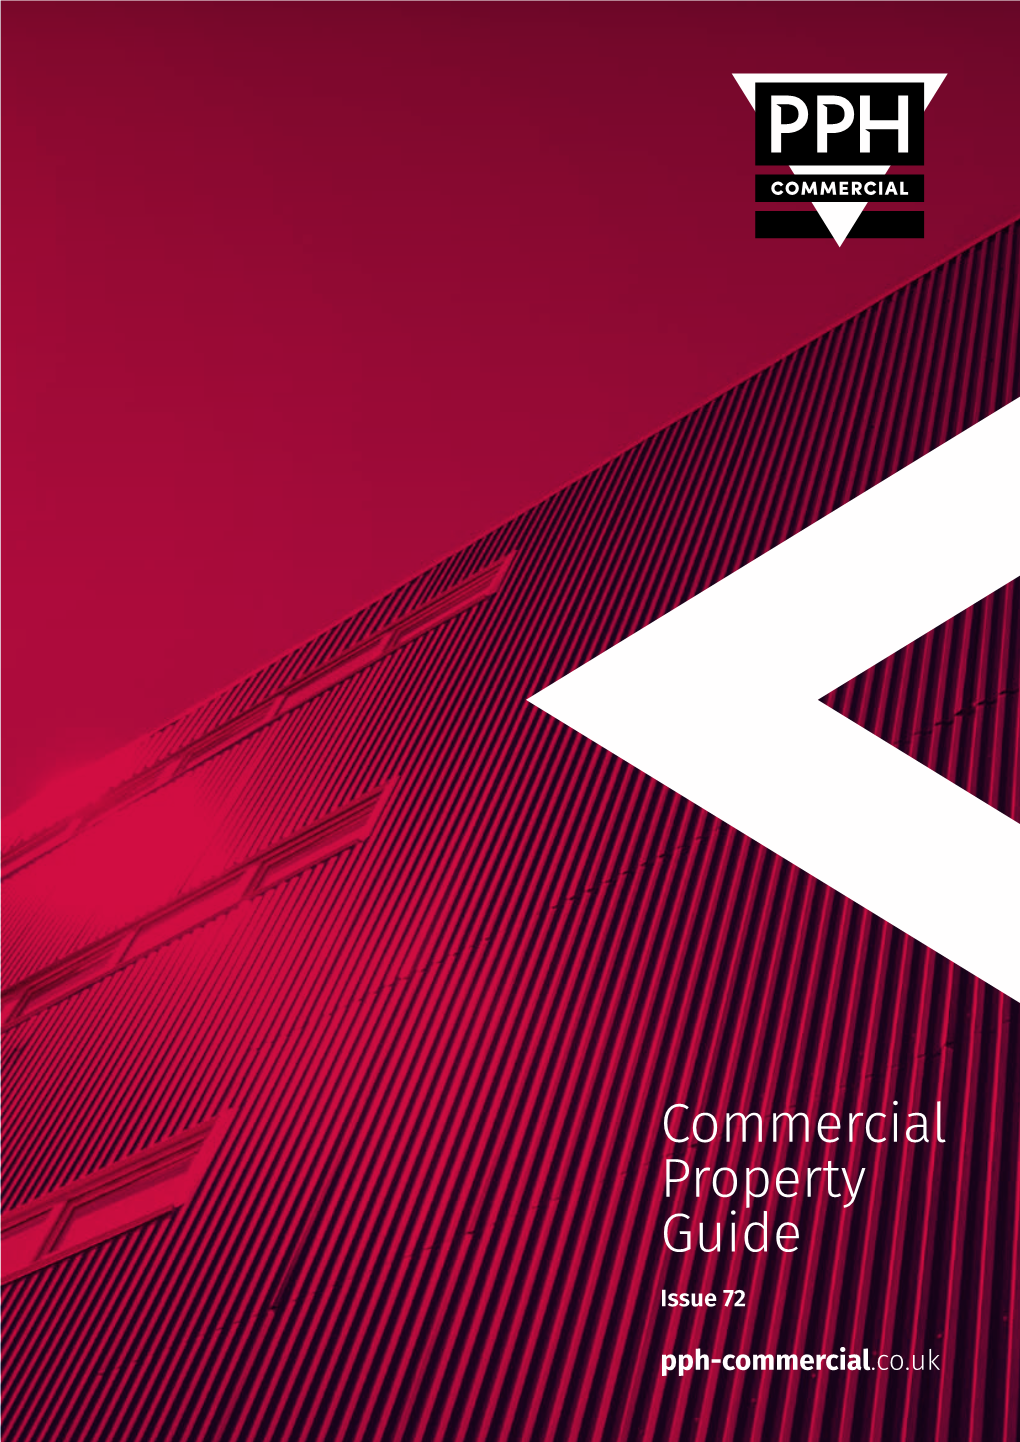 Commercial Property Guide Issue 72 Pph-Commercial.Co.Uk If You Would Like the Latest Sales, Lettings, Investment, Development and Commercial Property News: Follow Us